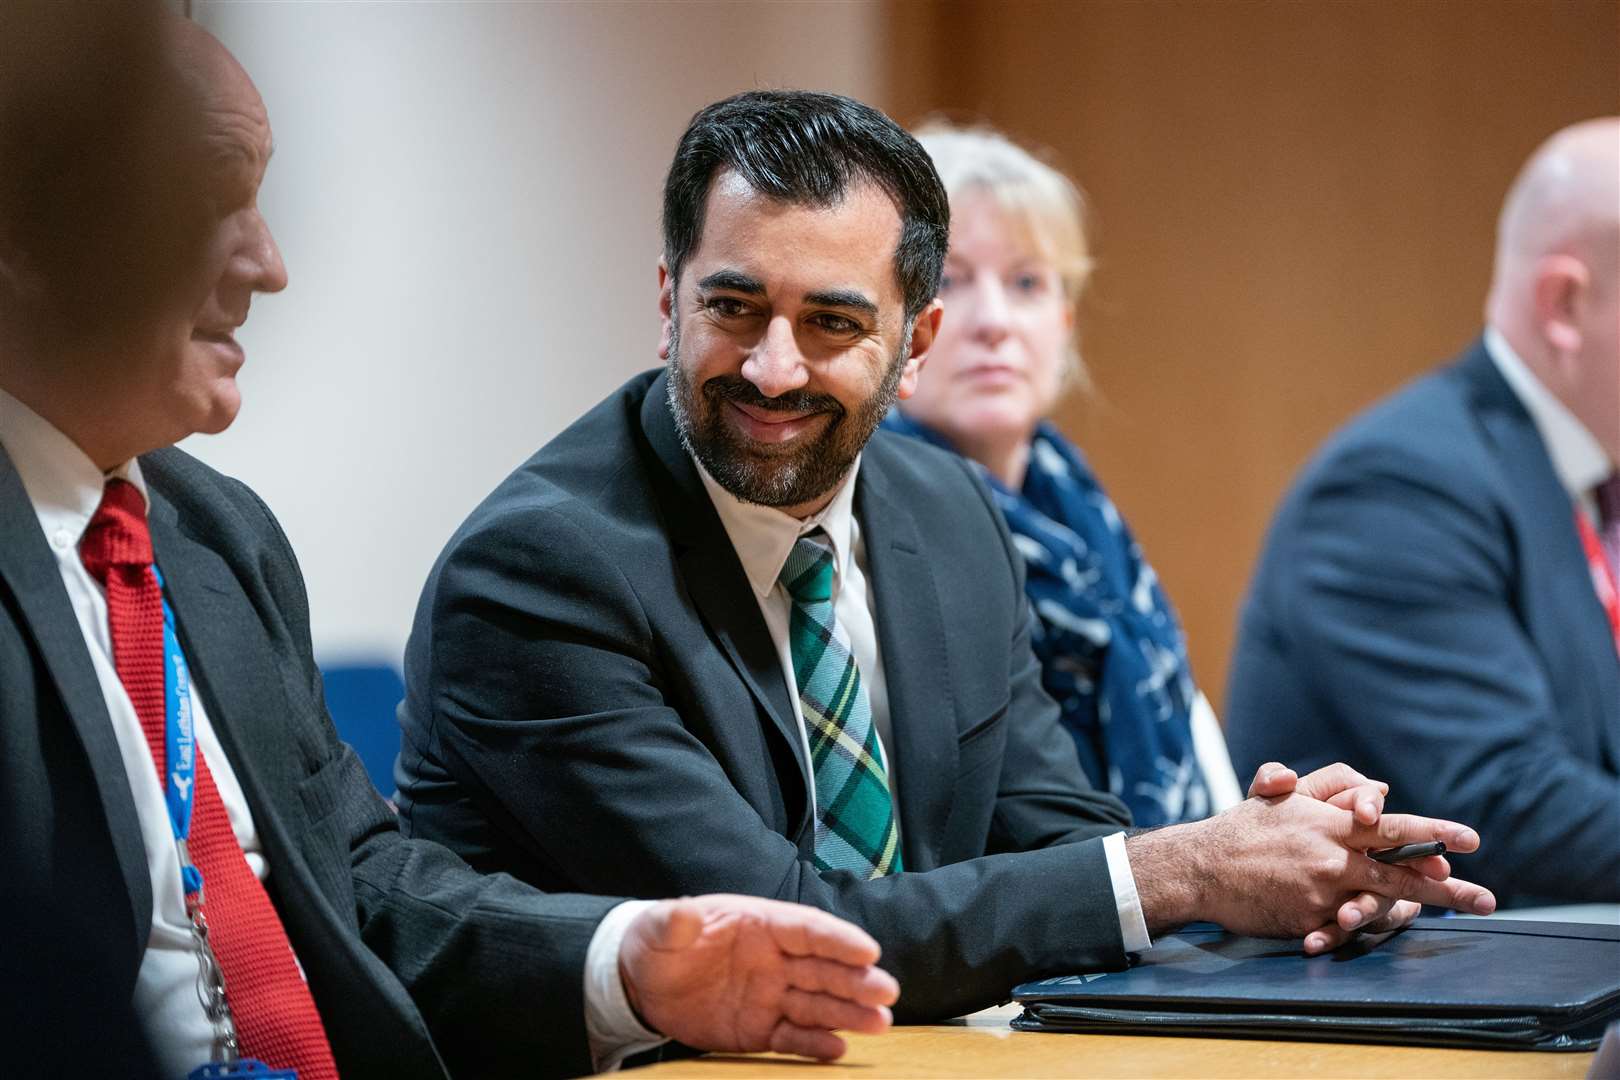 The Budget will be Humza Yousaf’s first as First Minister (Pete Summers/PA)